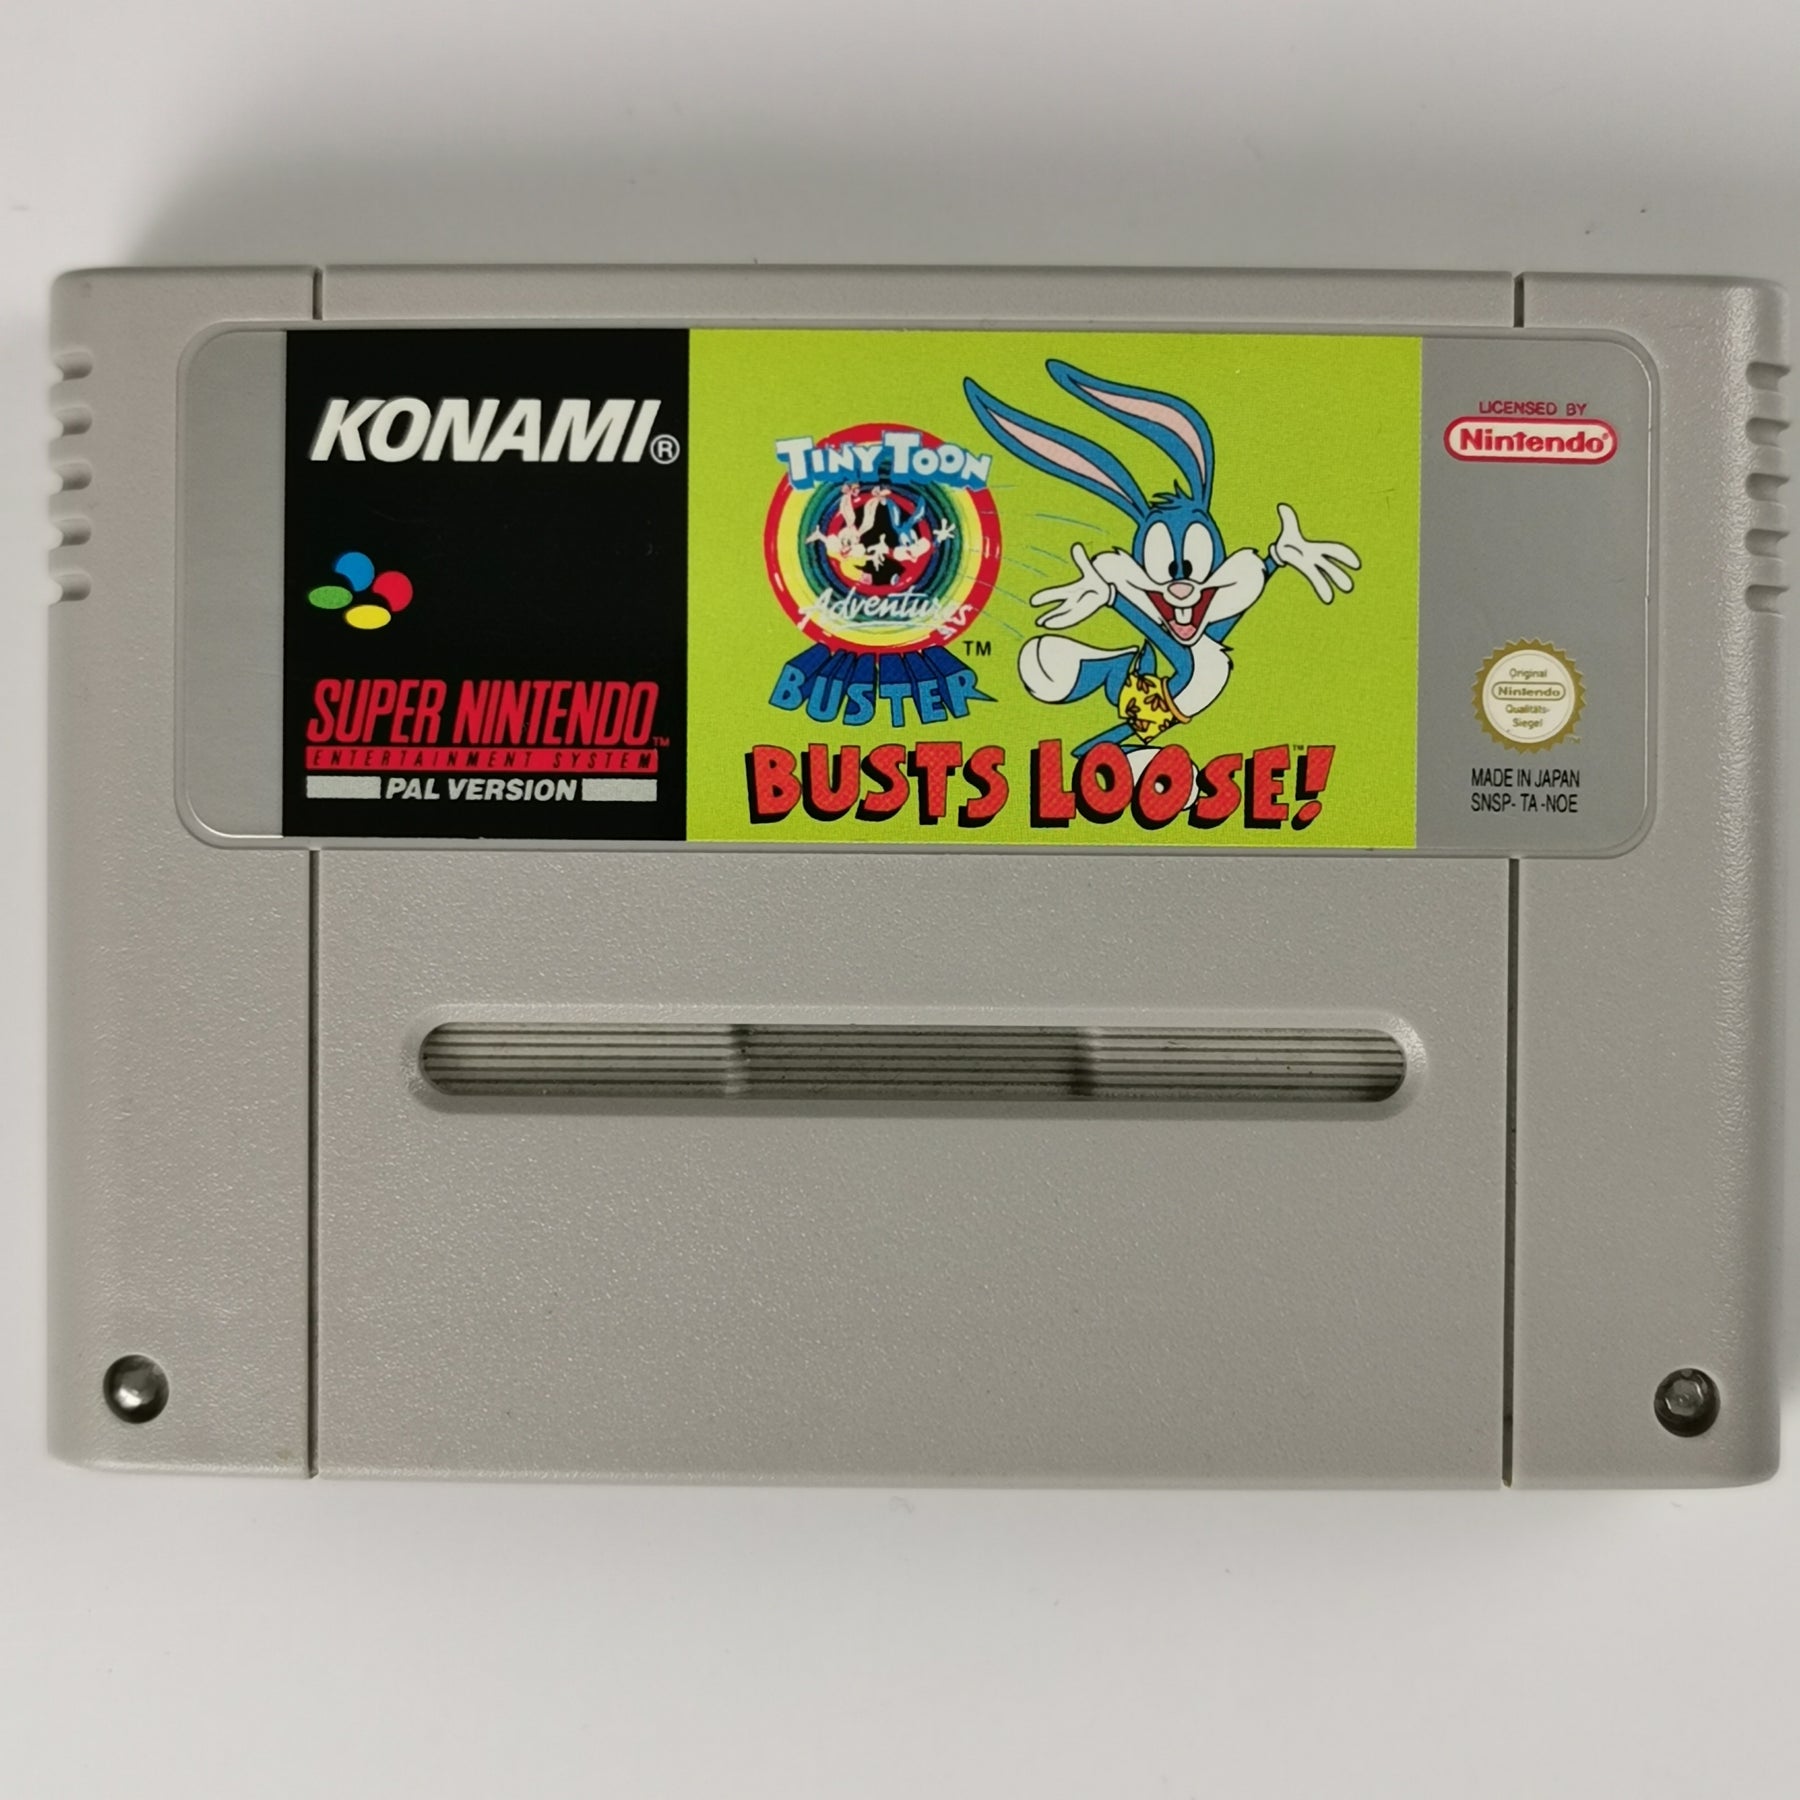 Tiny Toon Busts Loose! [SNES]